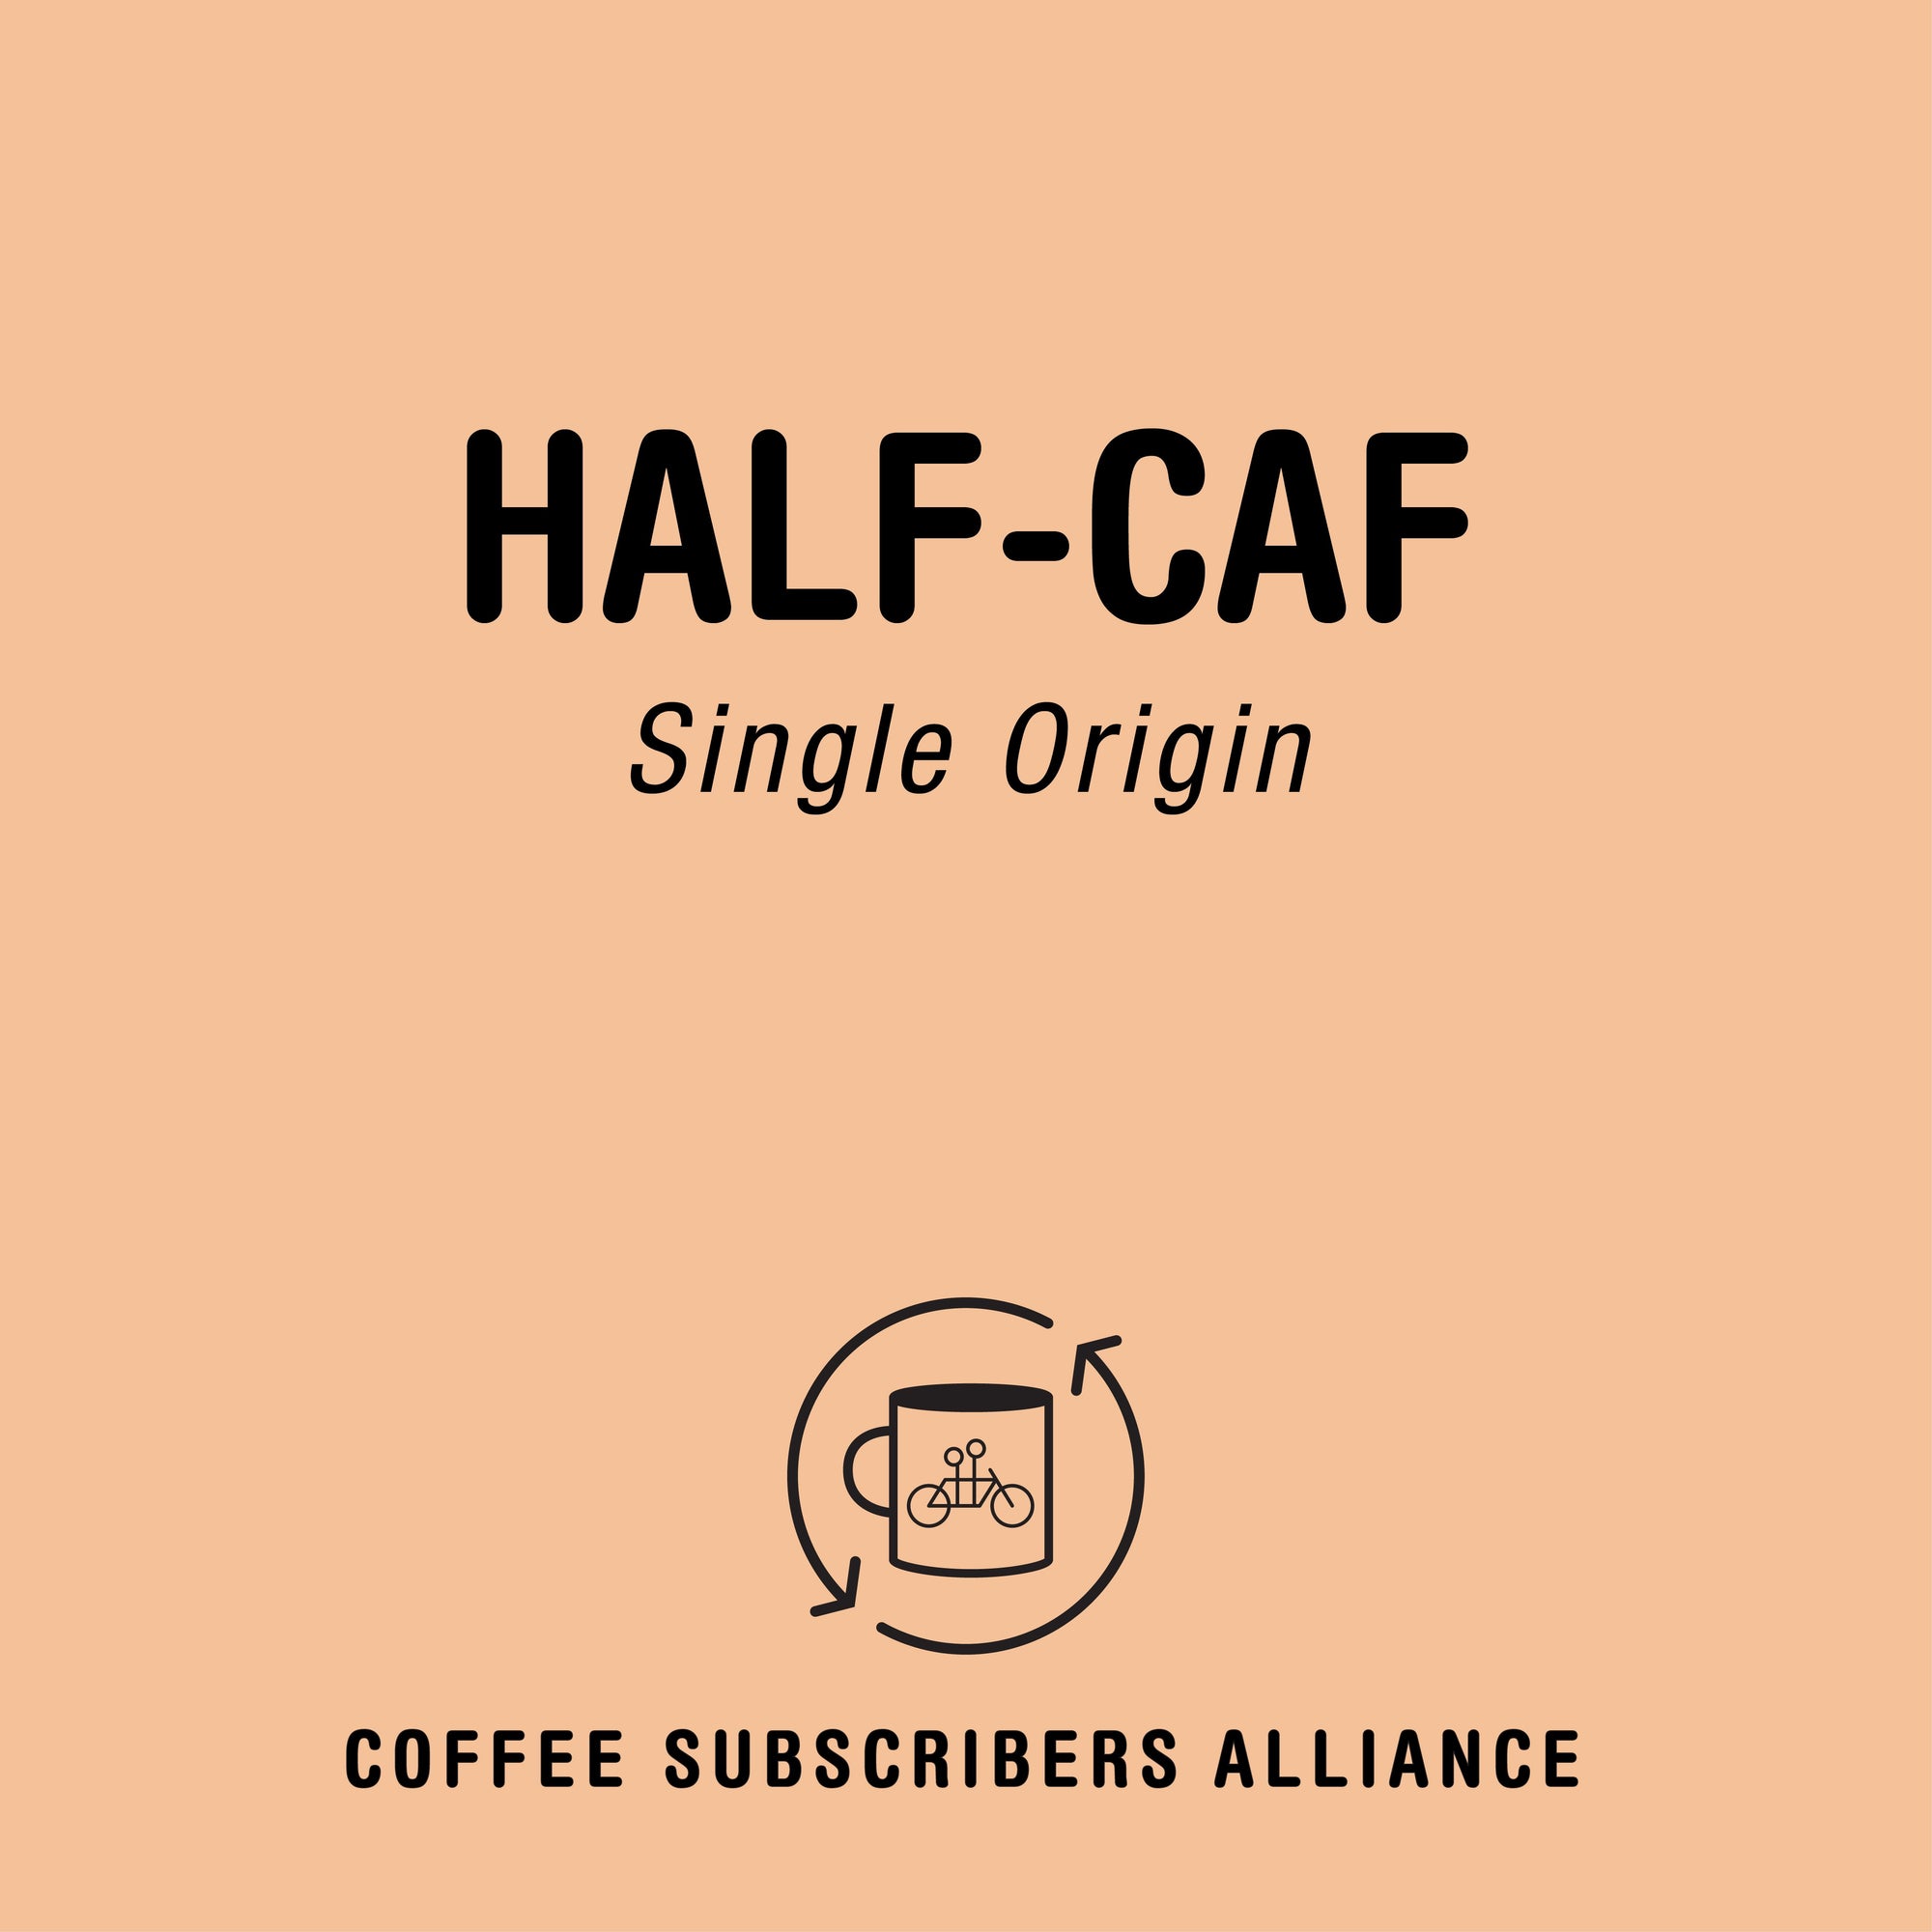 Graphic design featuring the text "Half-Caf Subscription Gift 8 Weeks x 6" with a logo of a coffee cup encircled by the words "Tandem coffee subscribers alliance" on a plain beige background.